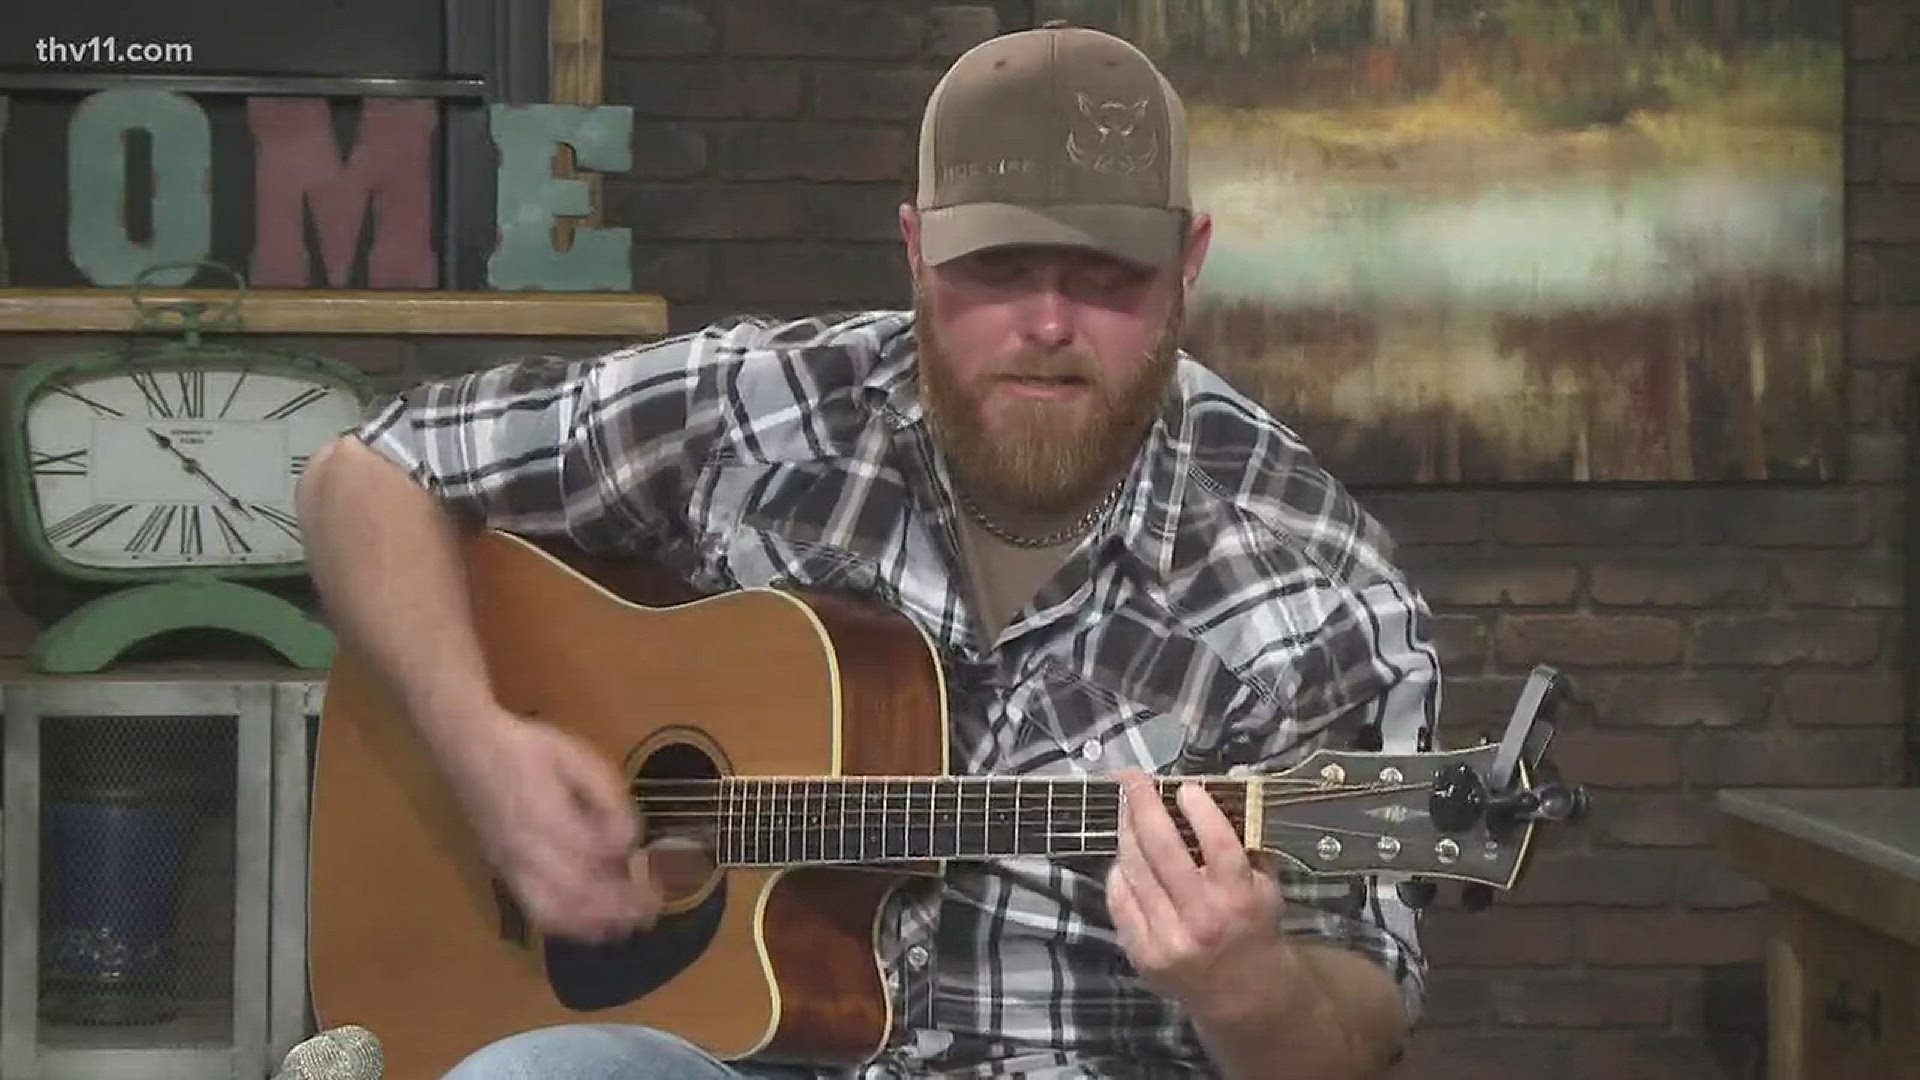 A few days ago, he was singing his songs on YouTube, and now this Arkansas oil rig worker has become a viral sensation! Heath Sanders got the chance of a lifetime to perform last week on the Bobby Bones show on national radio, changing his life forever!